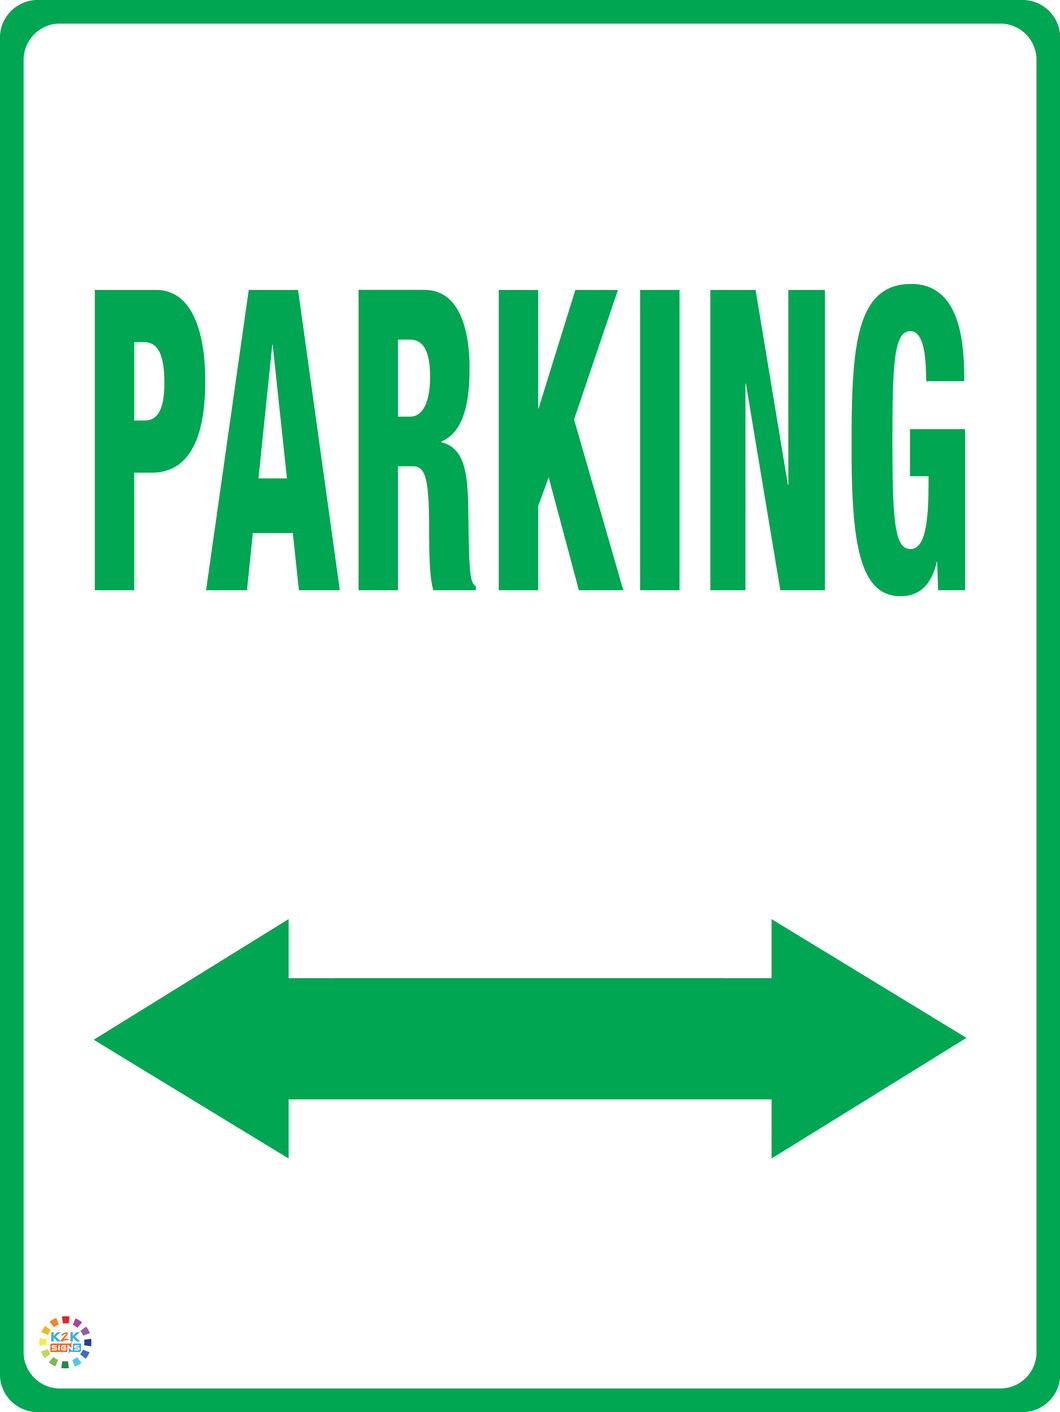 Parking (Two Way Arrow) Sign